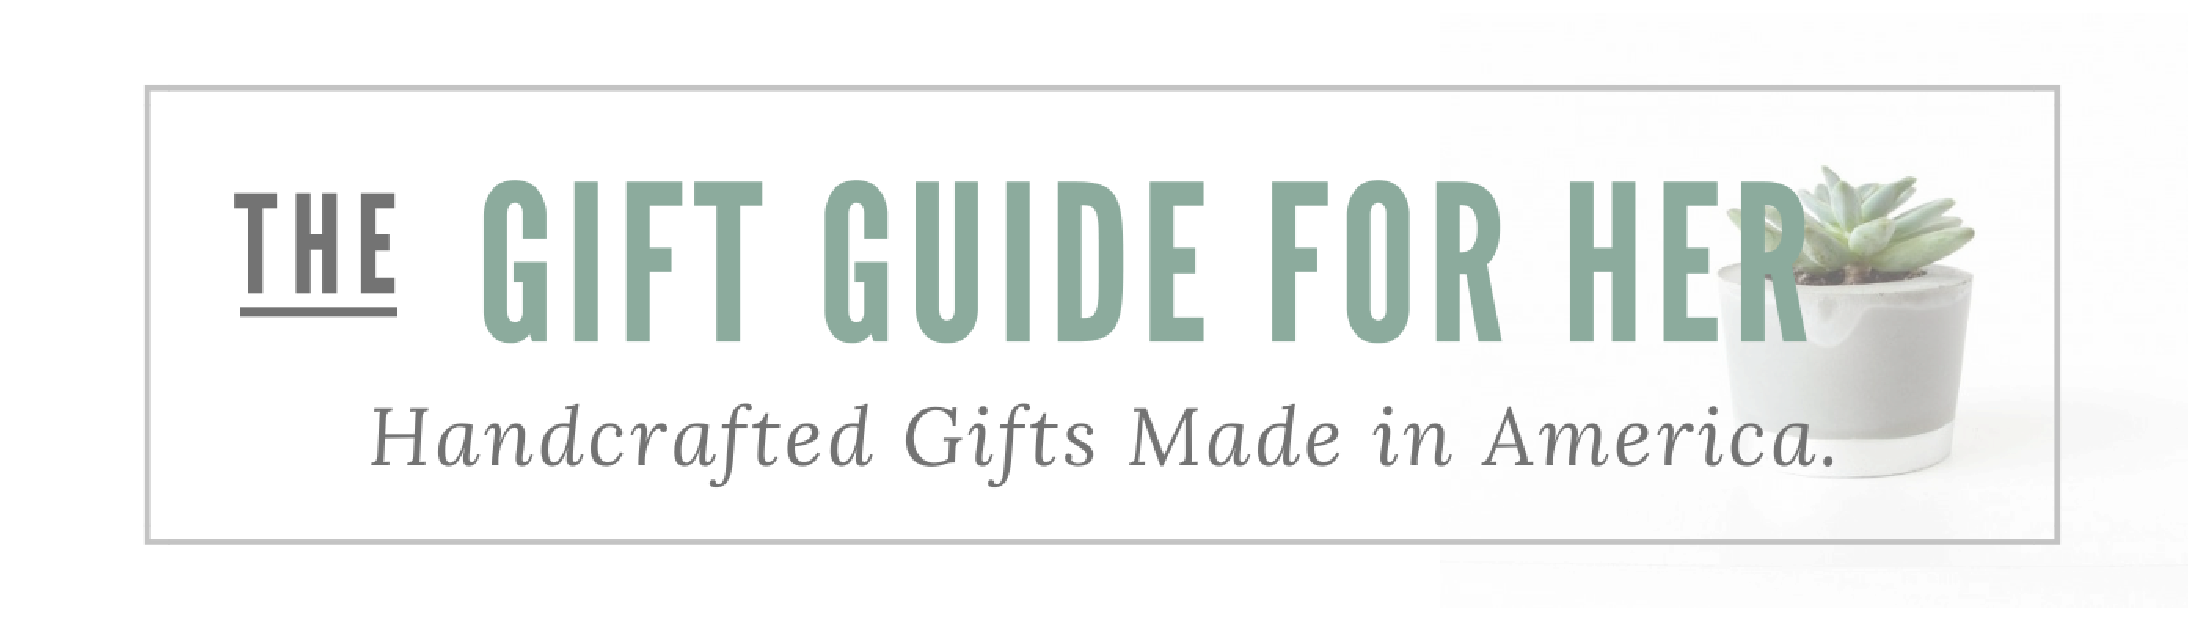 Gift Guide Landing Page Graphics